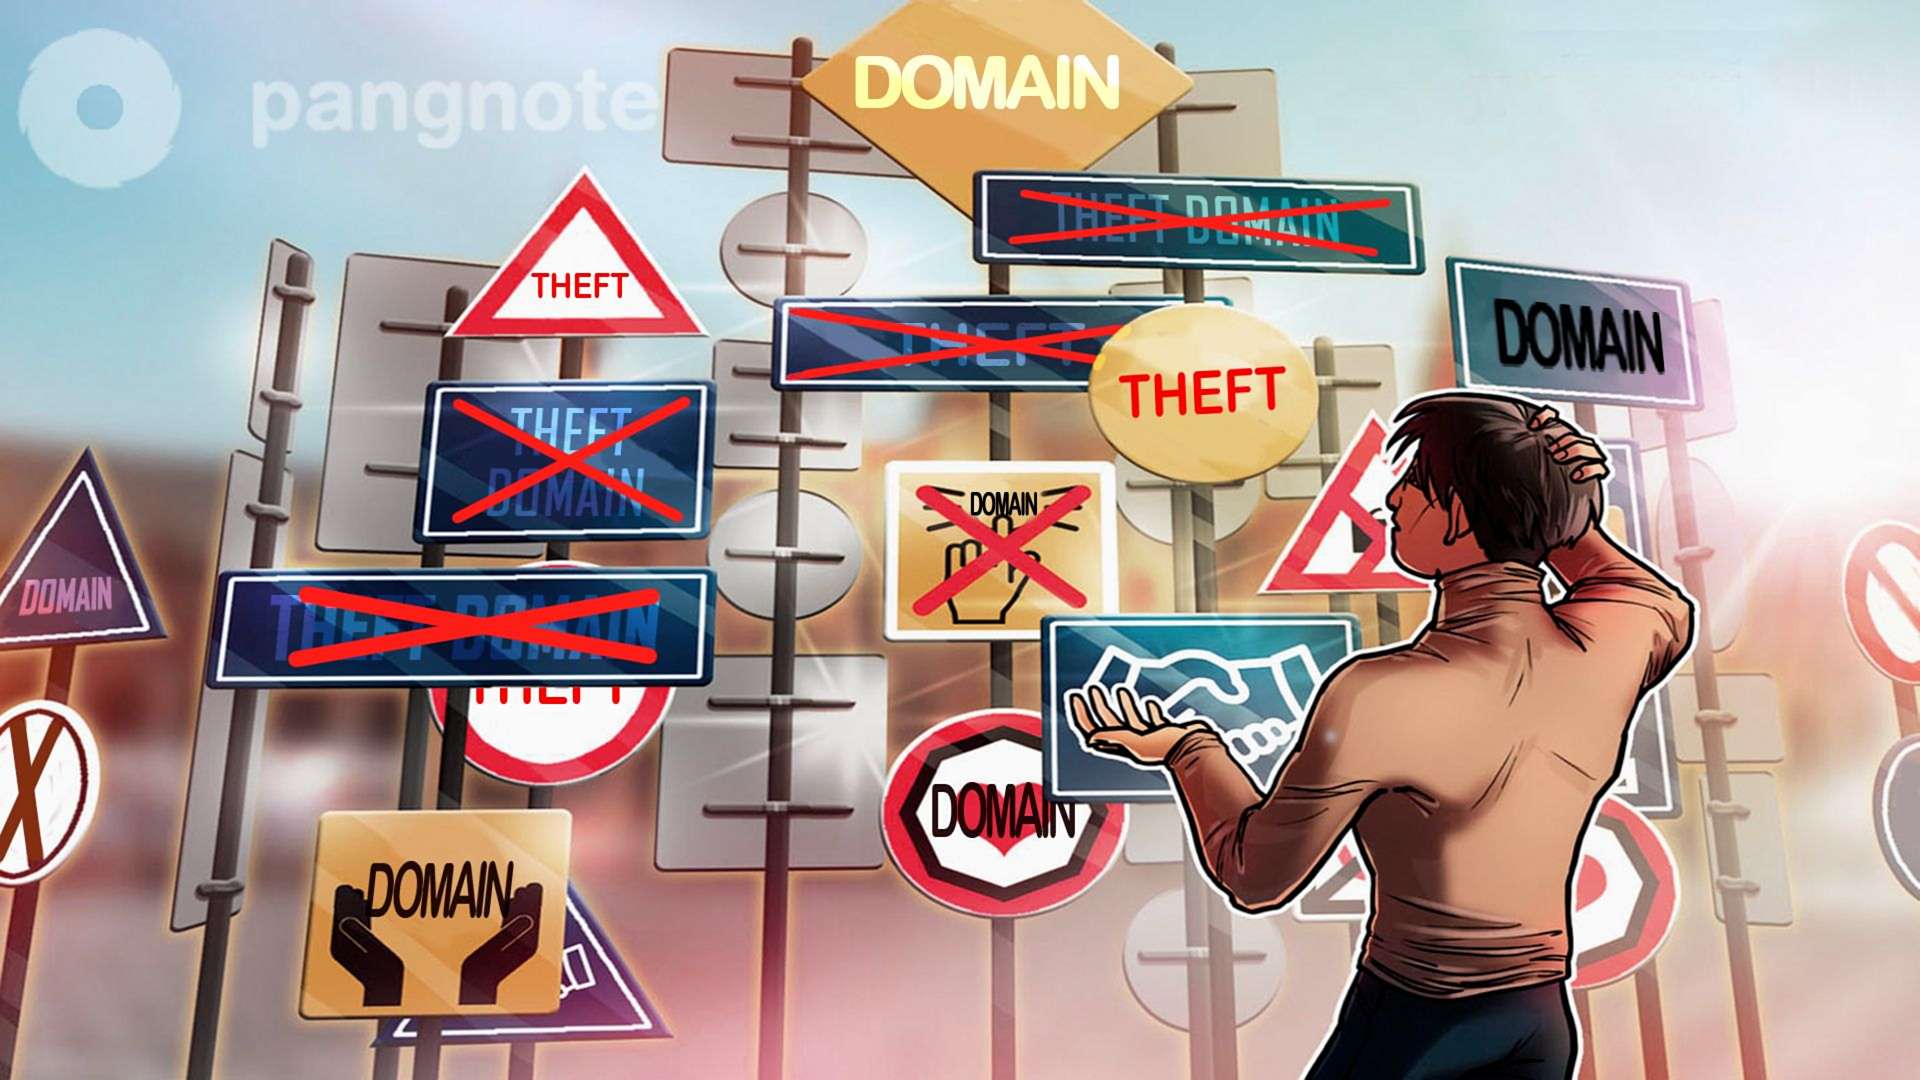 How to protect the domain from theft?